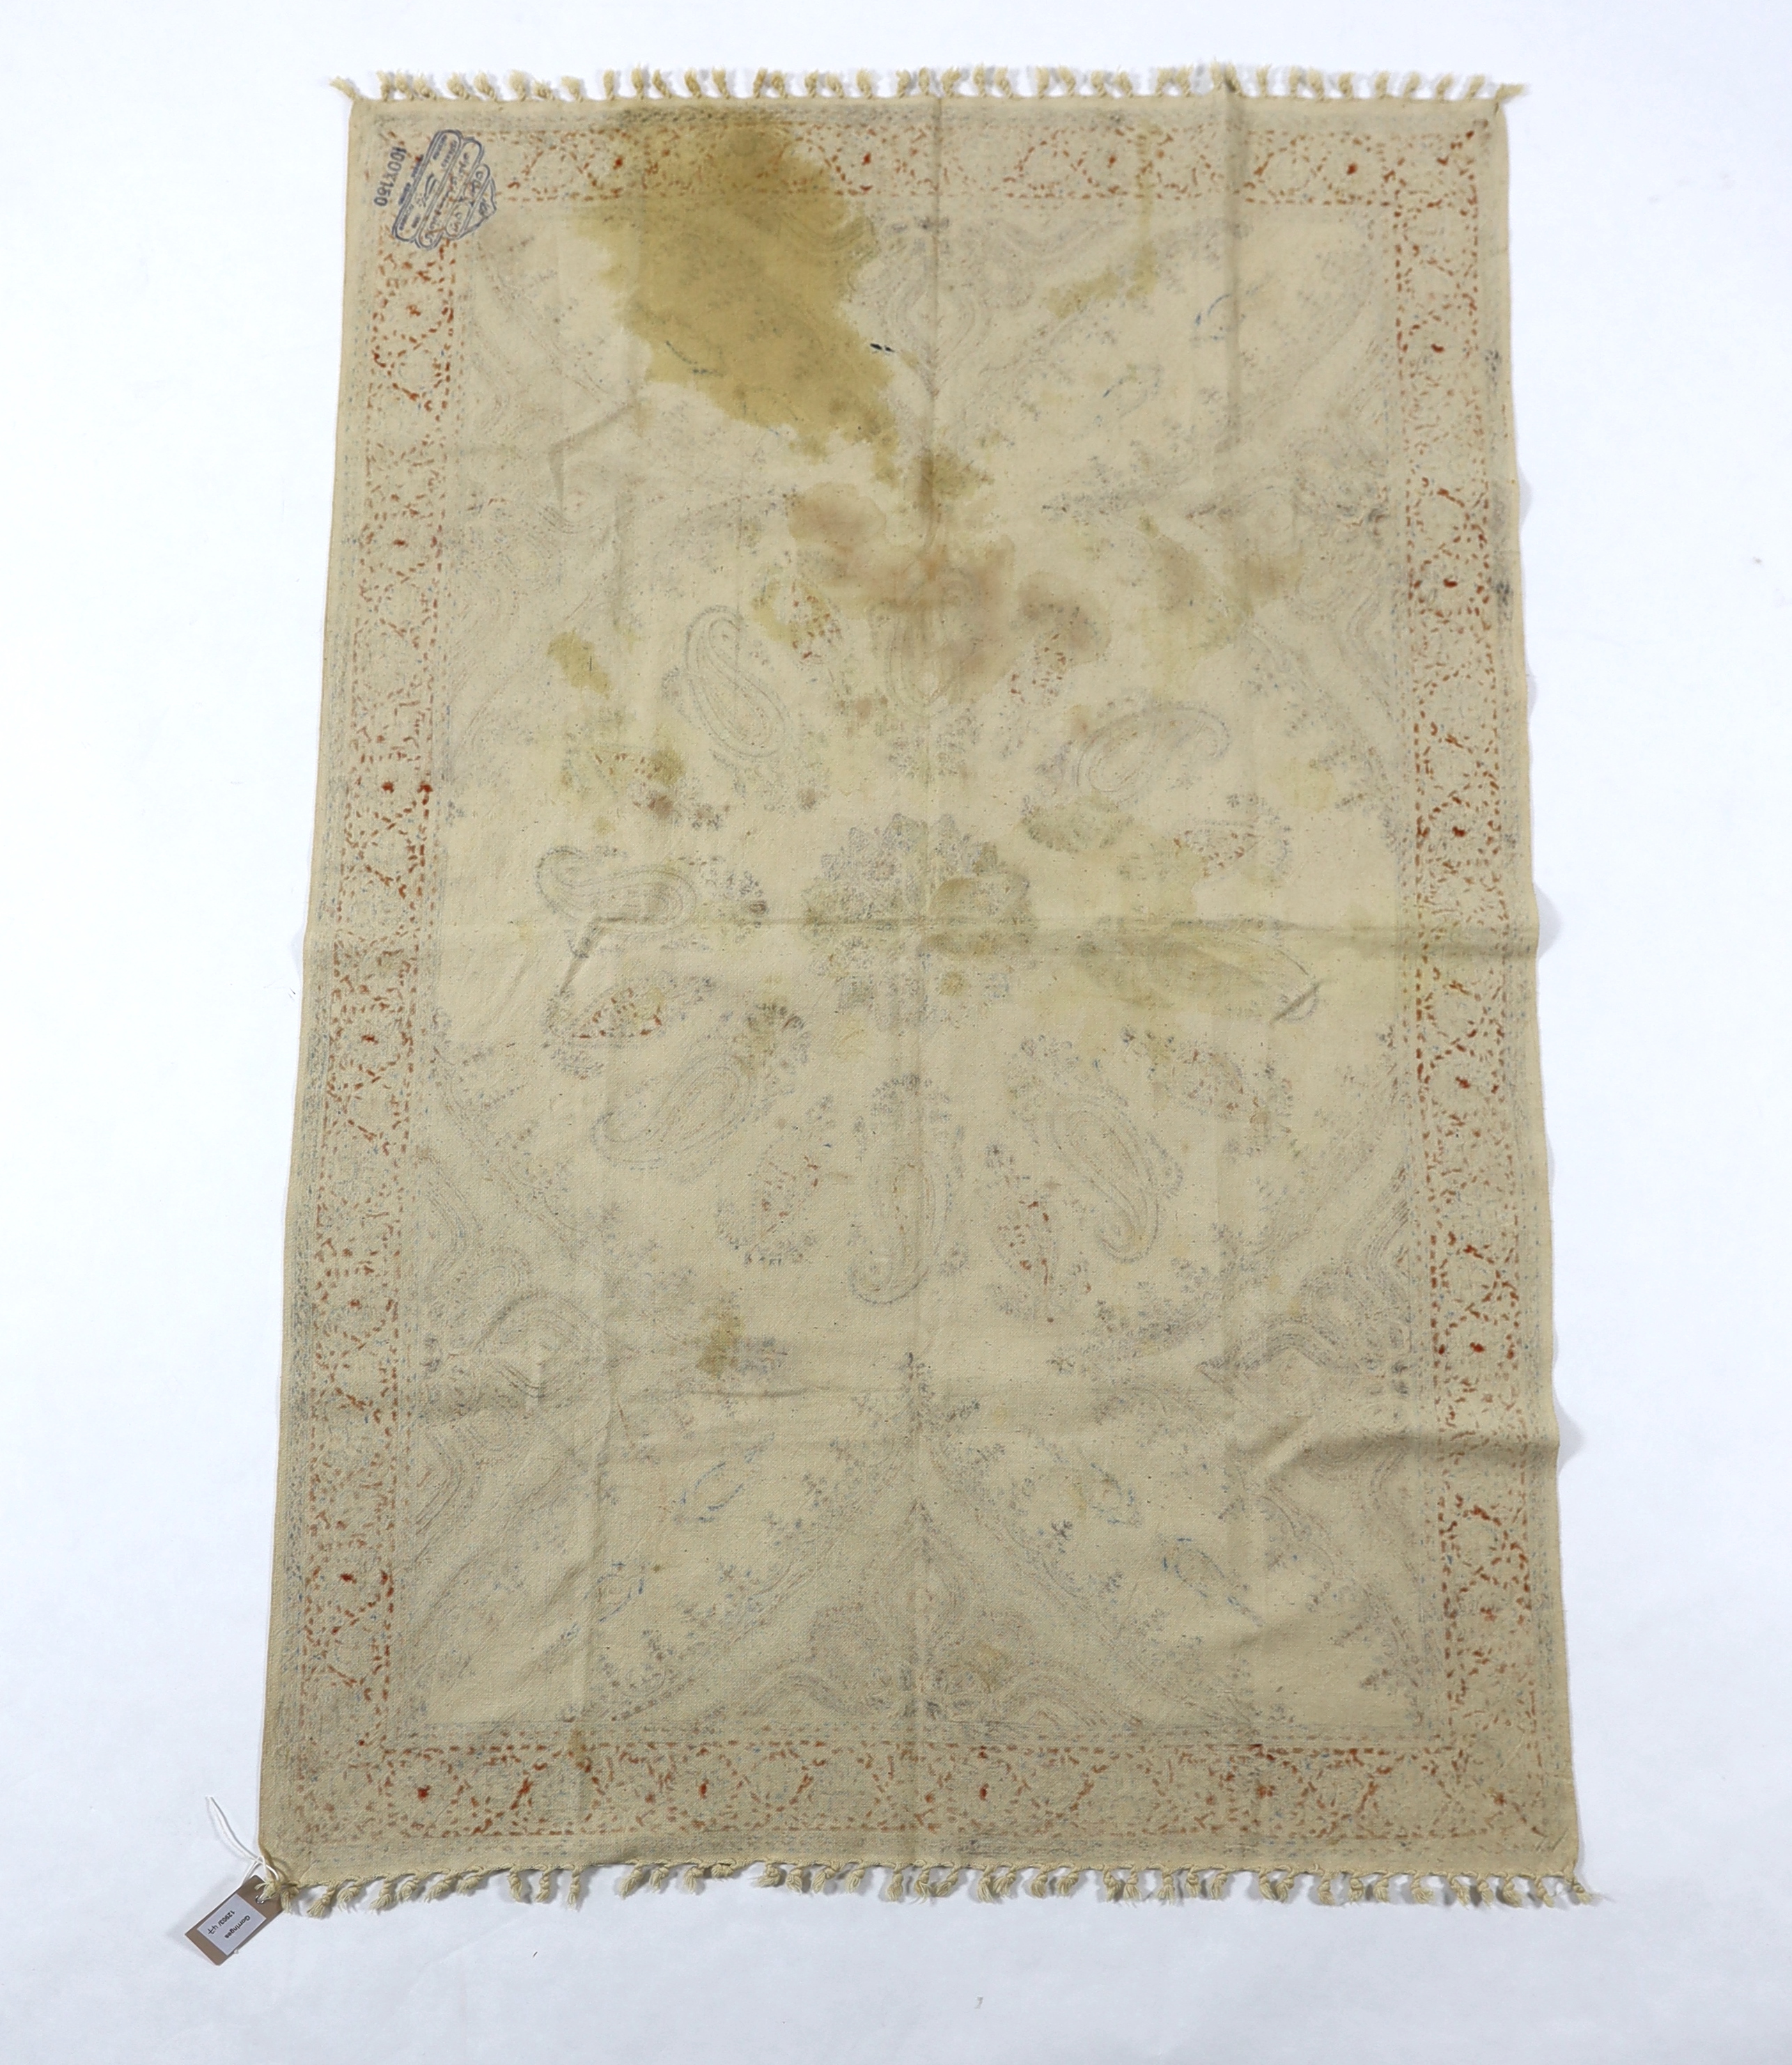 A 20th century Iranian printed paisley shawl, designed using indigo, red and ochre dyes, finished with knotted tassels either end, with an ink maker’s stamp on reverse, 148cm long x 100cm wide